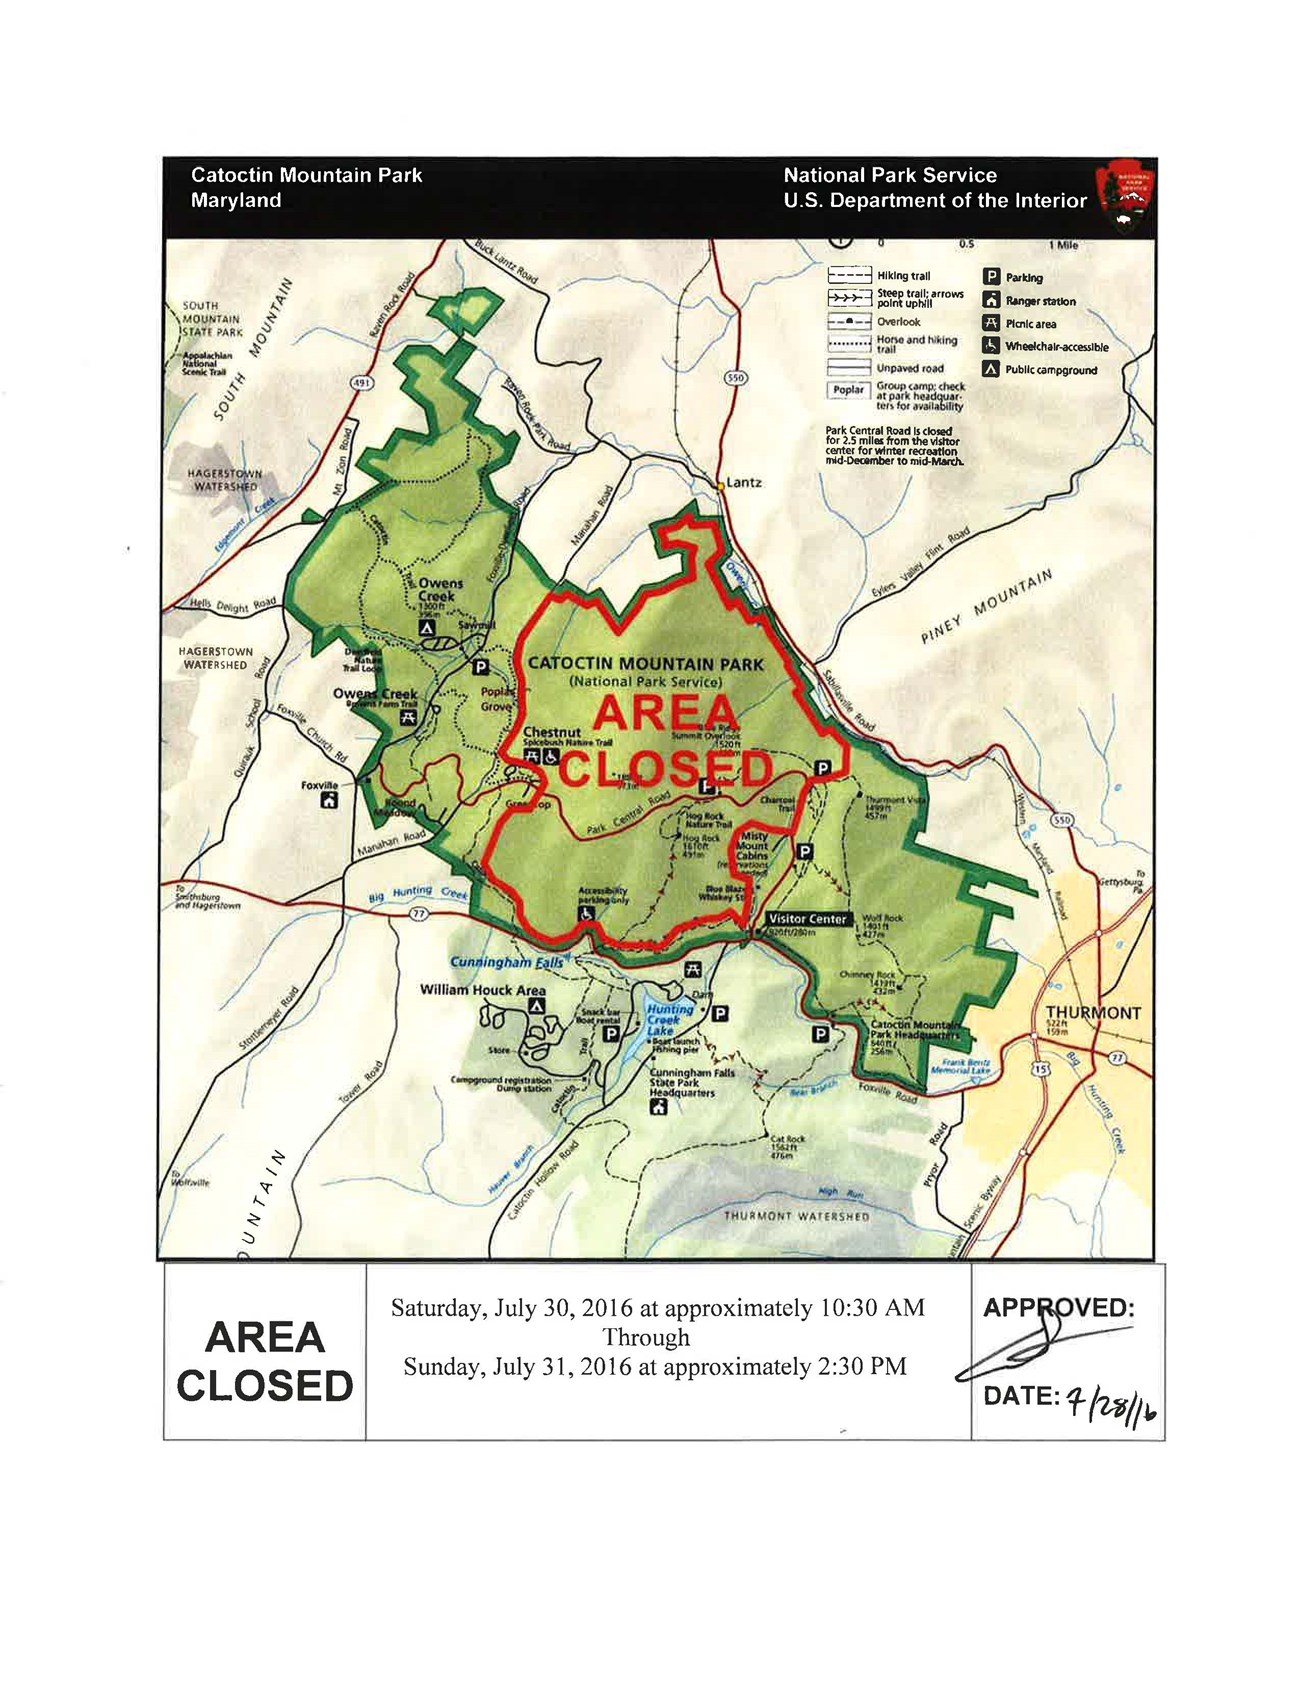 Map of Catoctin Mountain Park showing closed areas